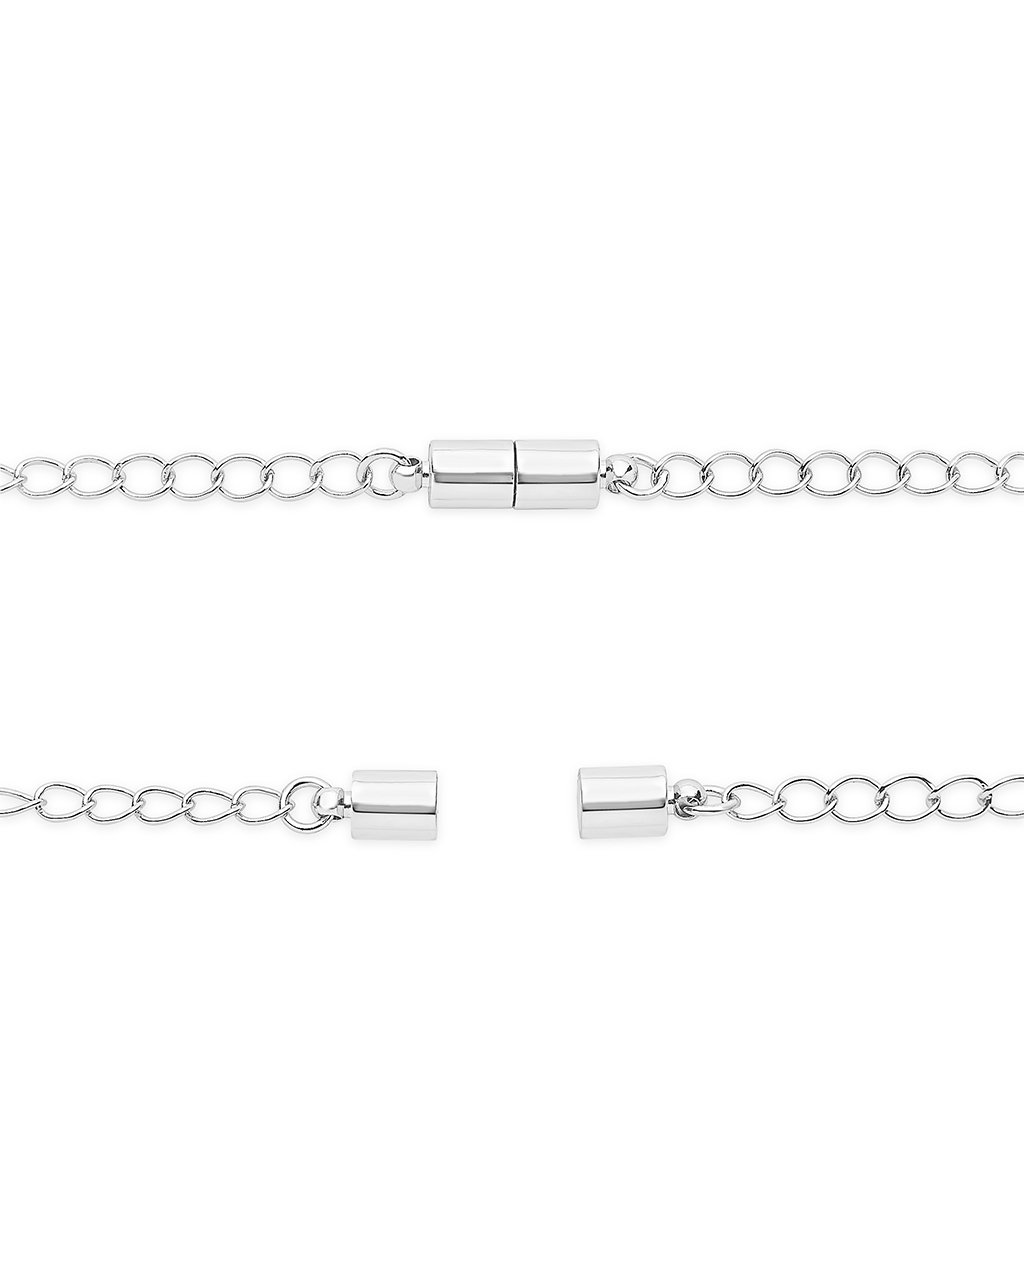 Magnetic Necklace Extender Accessories Sterling Forever 